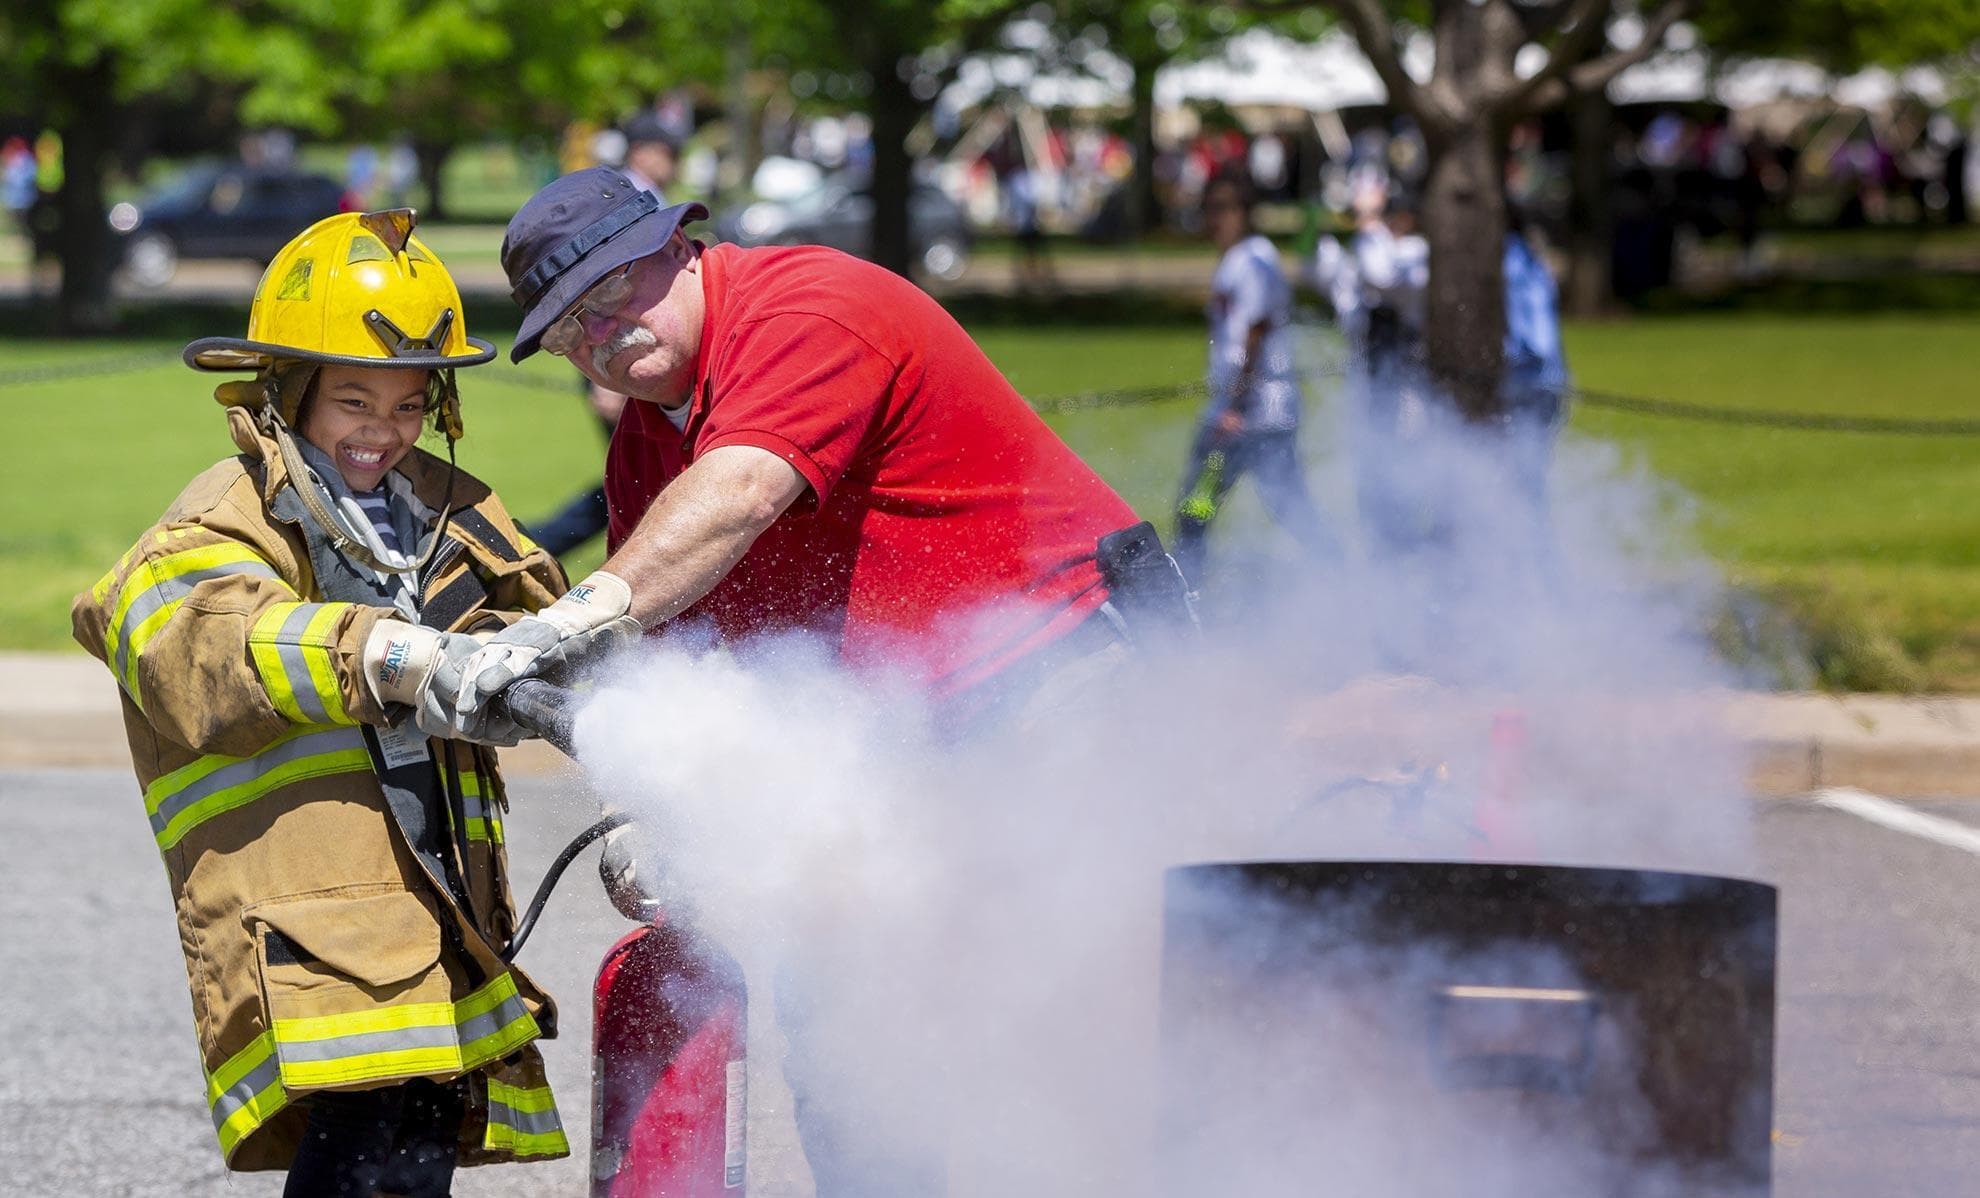 A child wearing an oversized adult fire fighter coat and helmet is helped by an instructor as they spray an open flame with a fire extinguisher